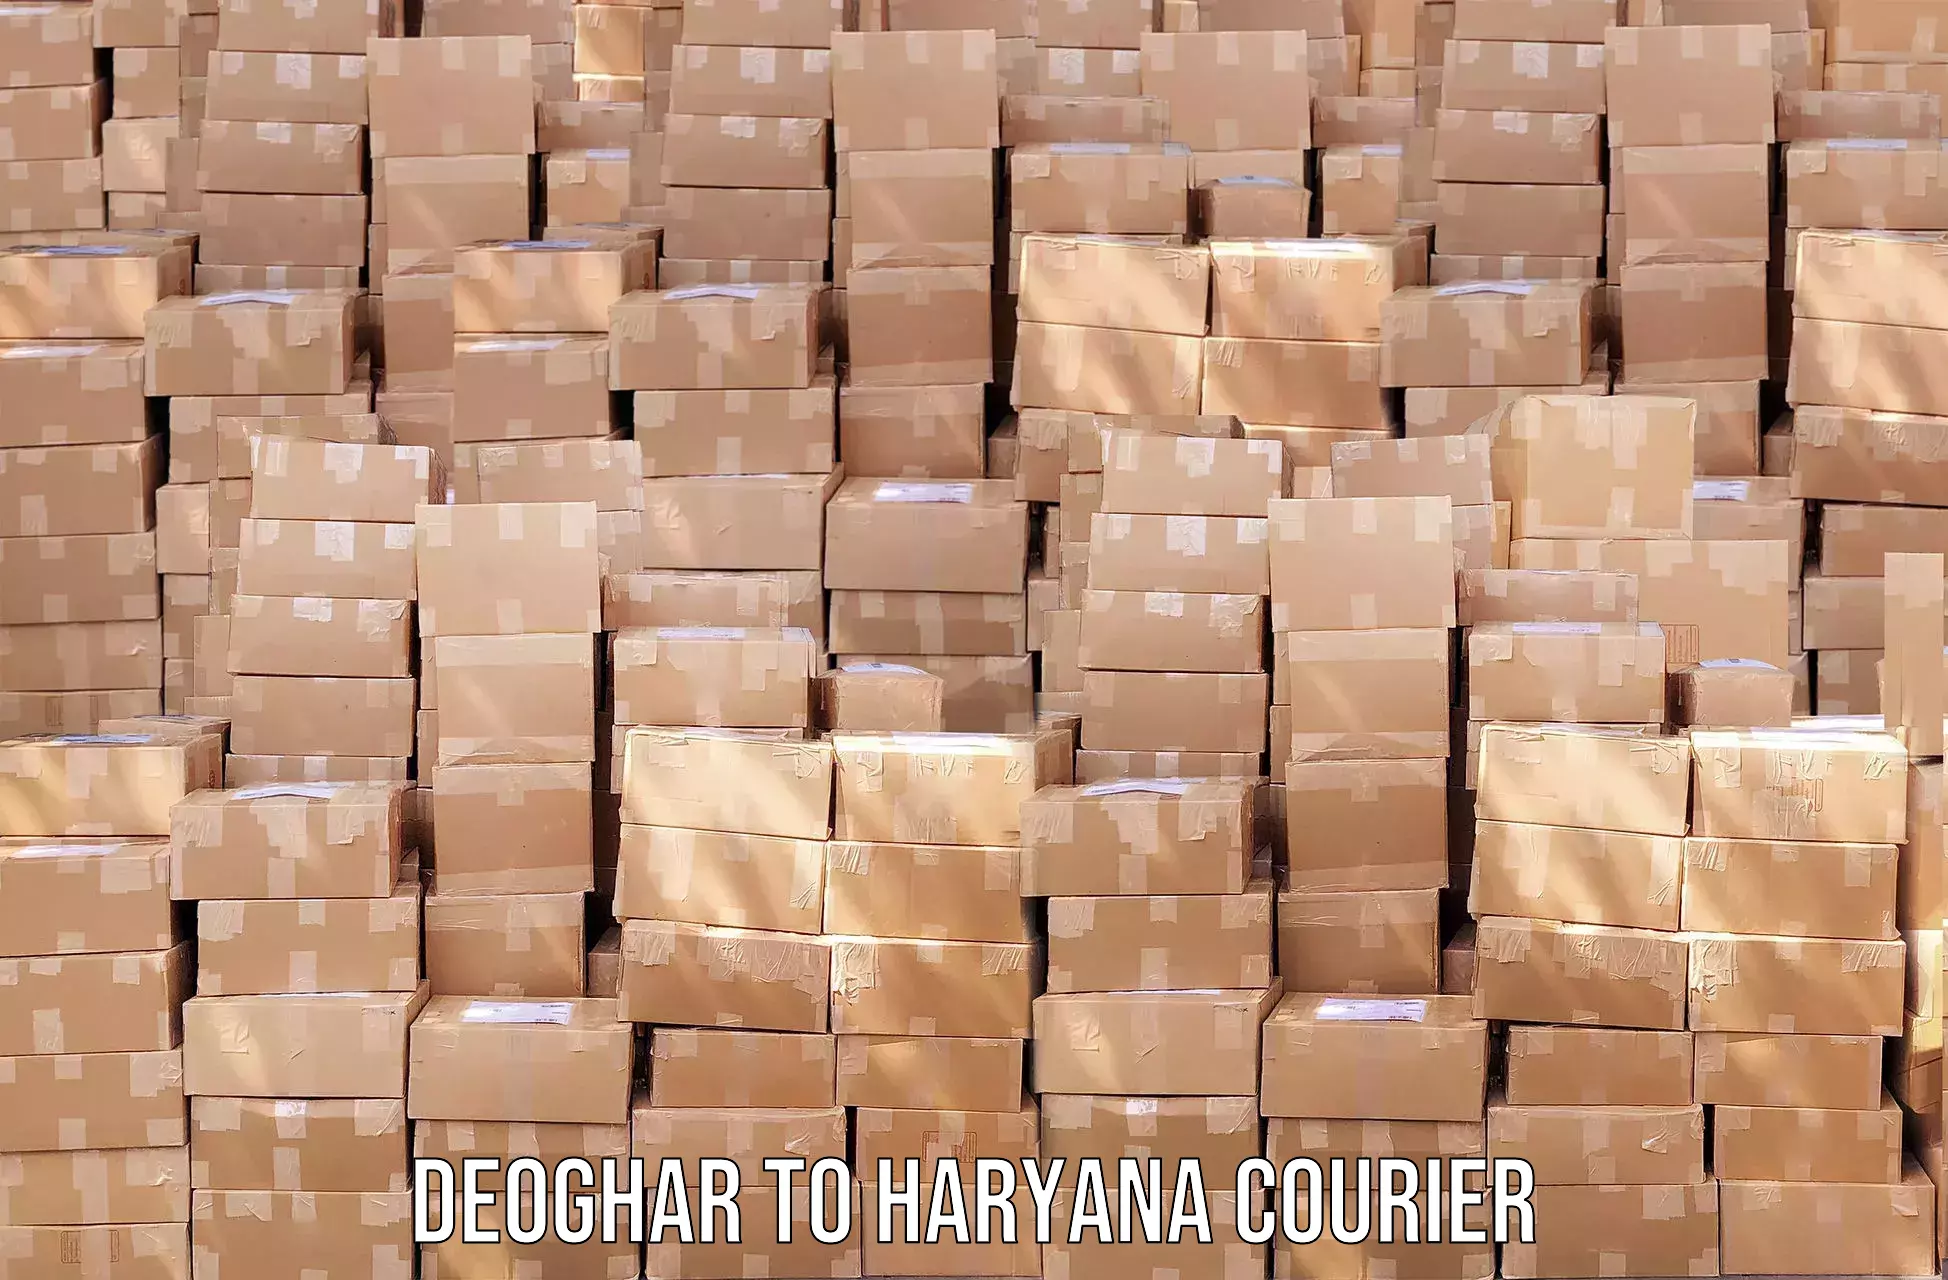 Express delivery network Deoghar to Haryana